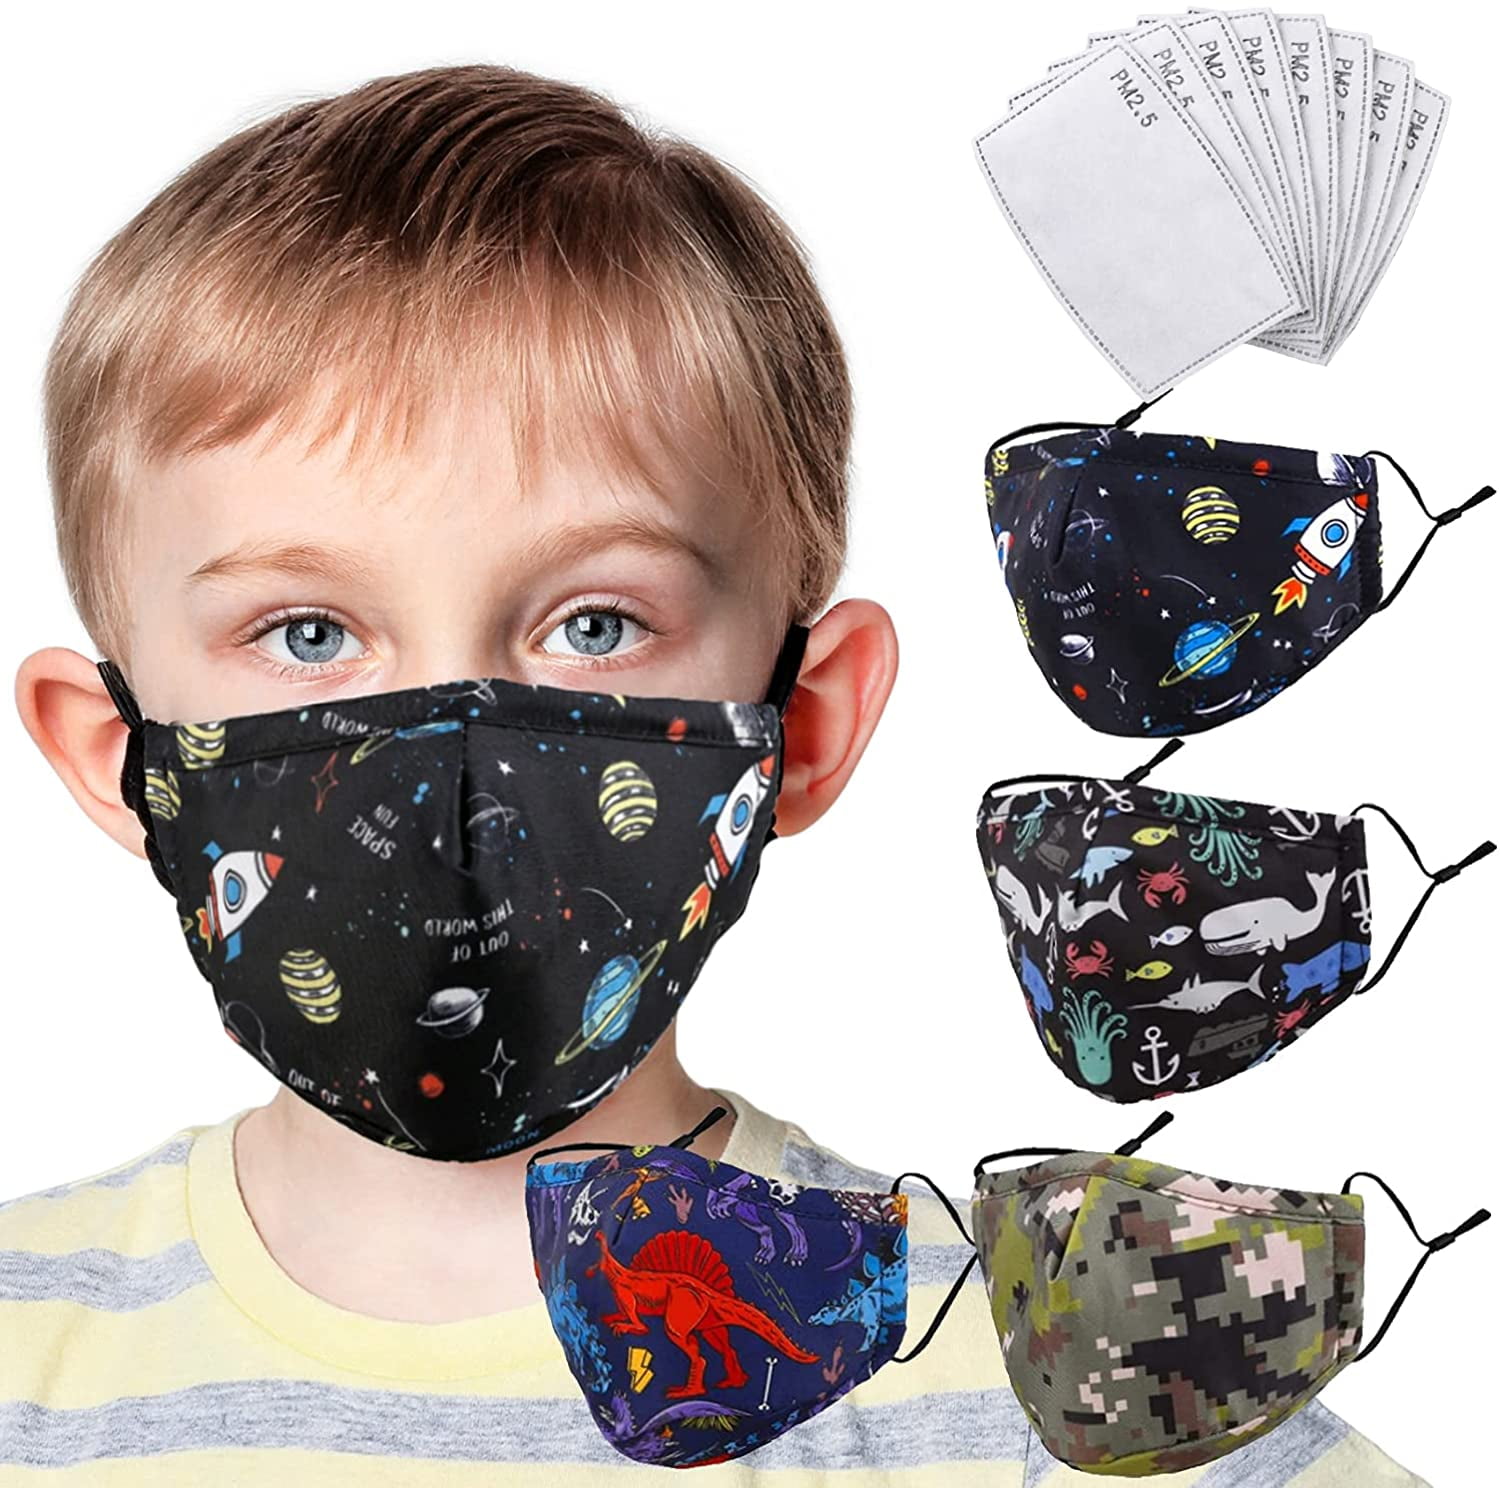 GPURE 5 Pcs Camo Children Cotton Dust Face Cloth With Breather Washable Reusable Windproof Outdoor Cycling Sport Half Face Earloop For Kids Boy Girl Haze Fog Protection With Filter Pocket 